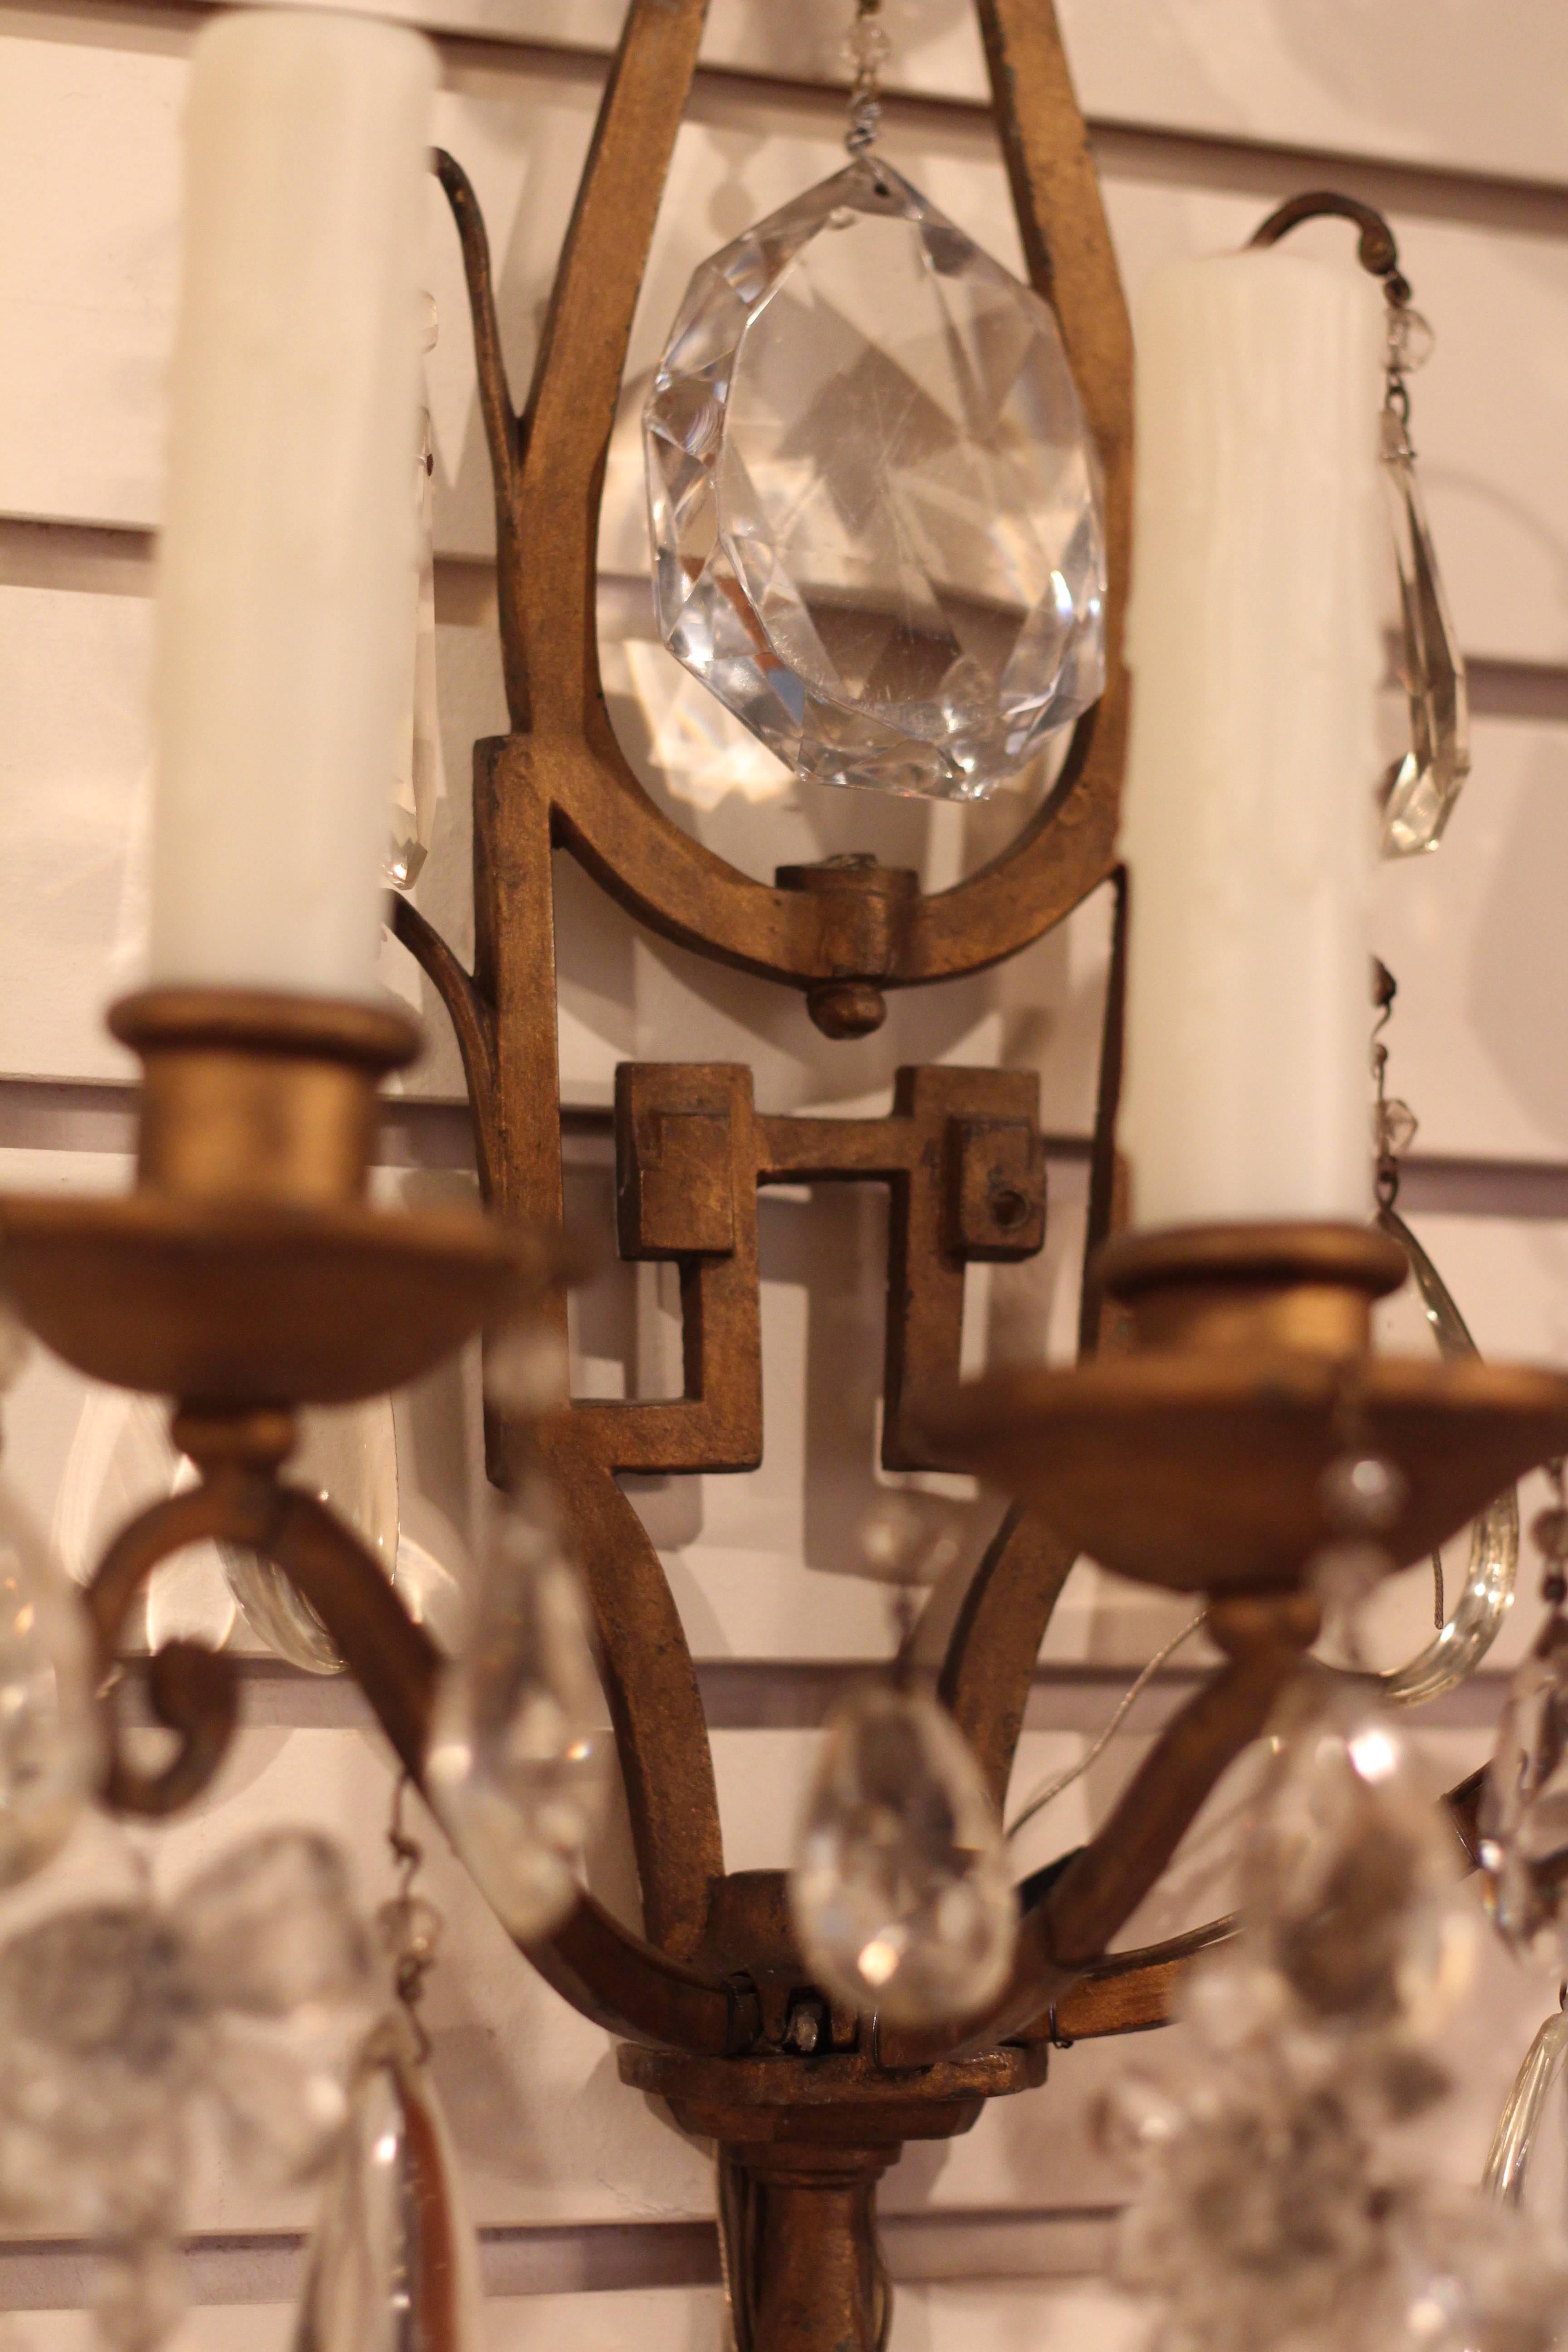 Pair of Bagues crystal sconces each with three lights. Two pairs available.